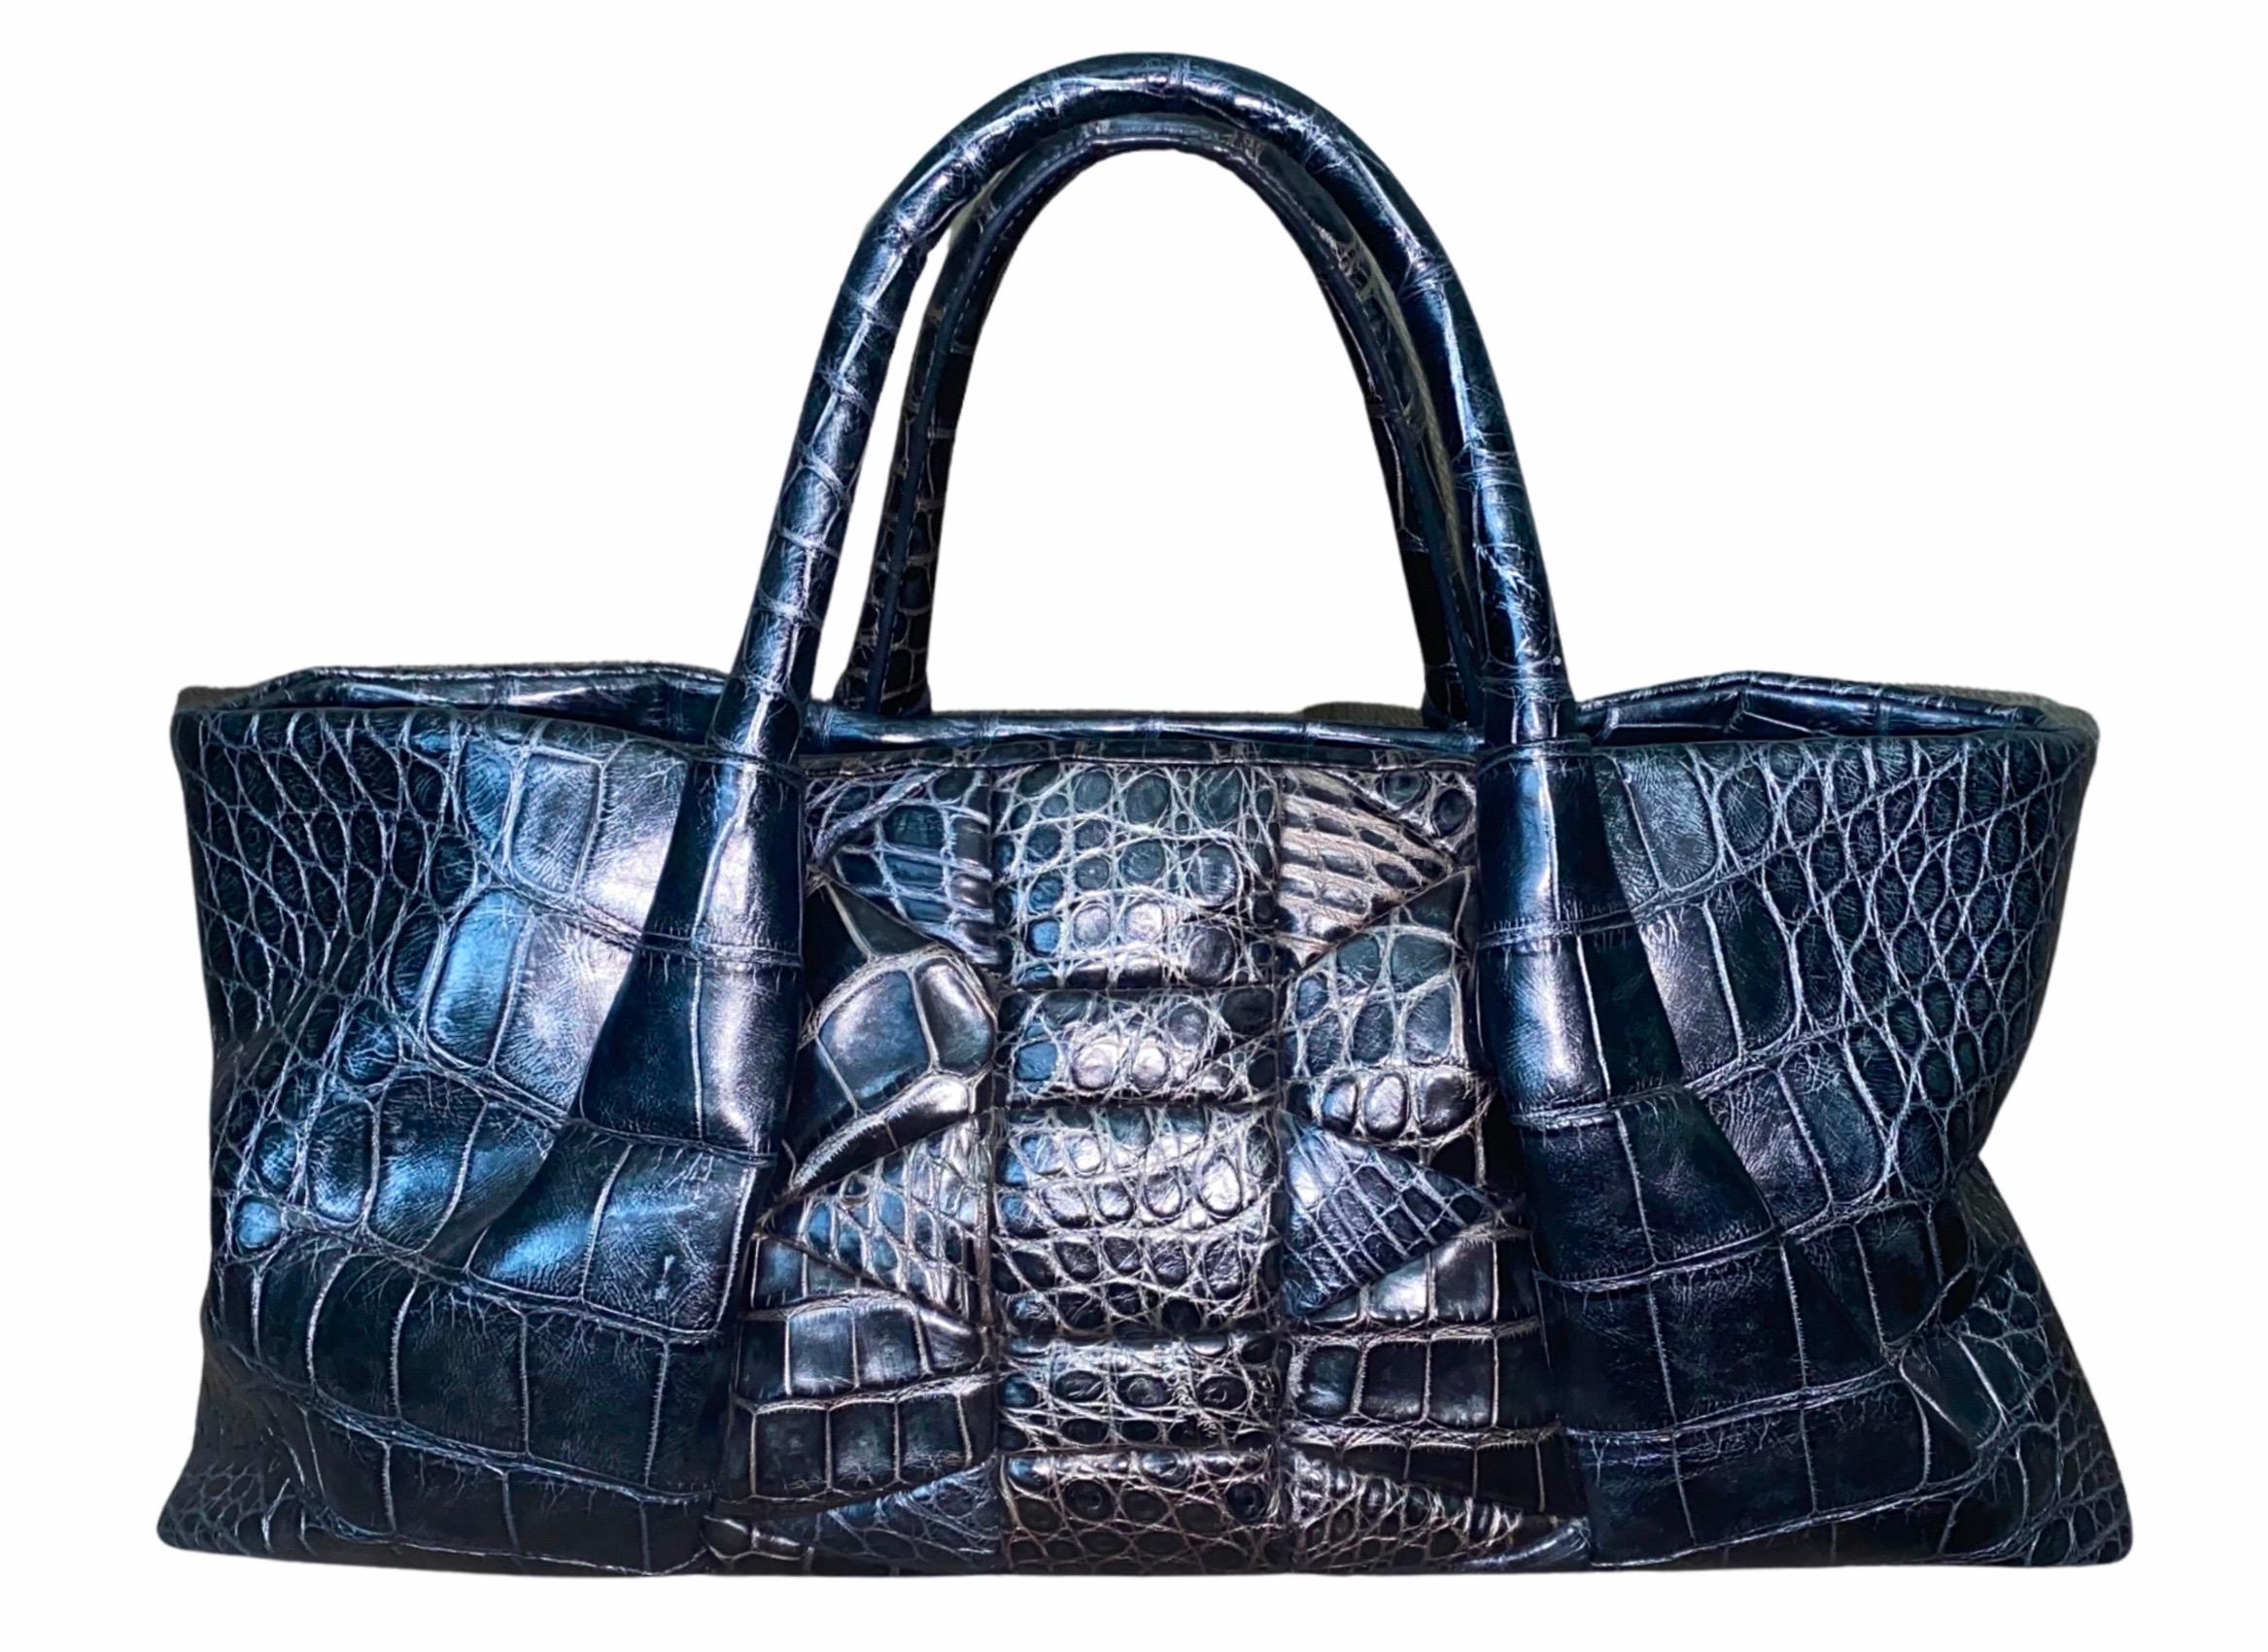 New & Stunning Alligator Skin Shoulder Bag by Salvatore Ferragamo - a timeless classic!

Made of finest alligator skin
Graphite grey color
Fully lined with beige suede leather
One inner bag with zip closure, three open inner bags for phone